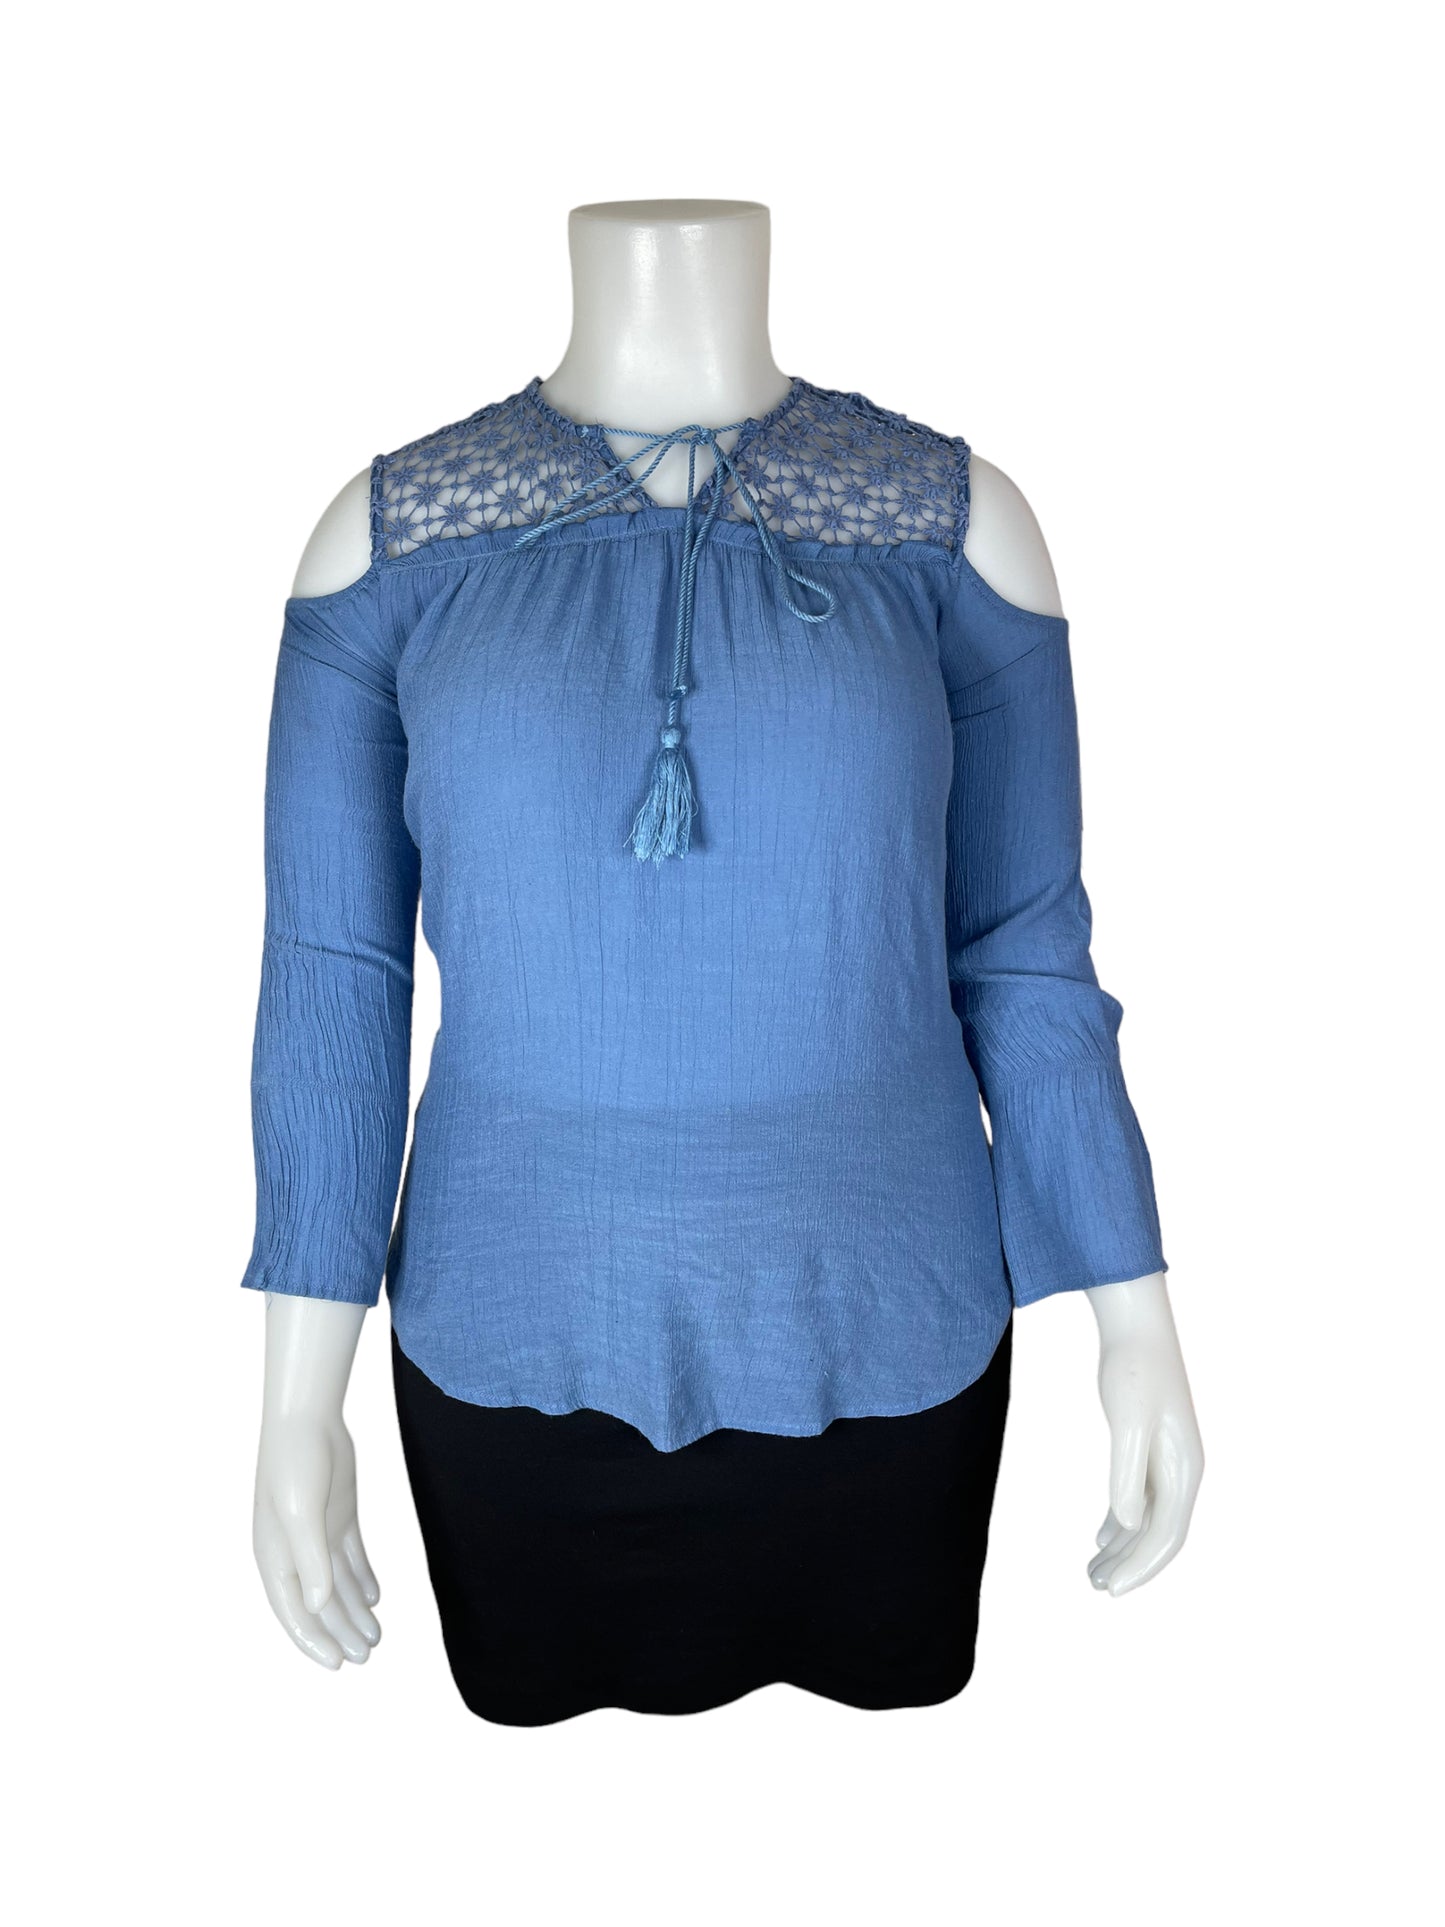 "L Love" Blue Shirt with Lacey Daisy Shoulders (L)